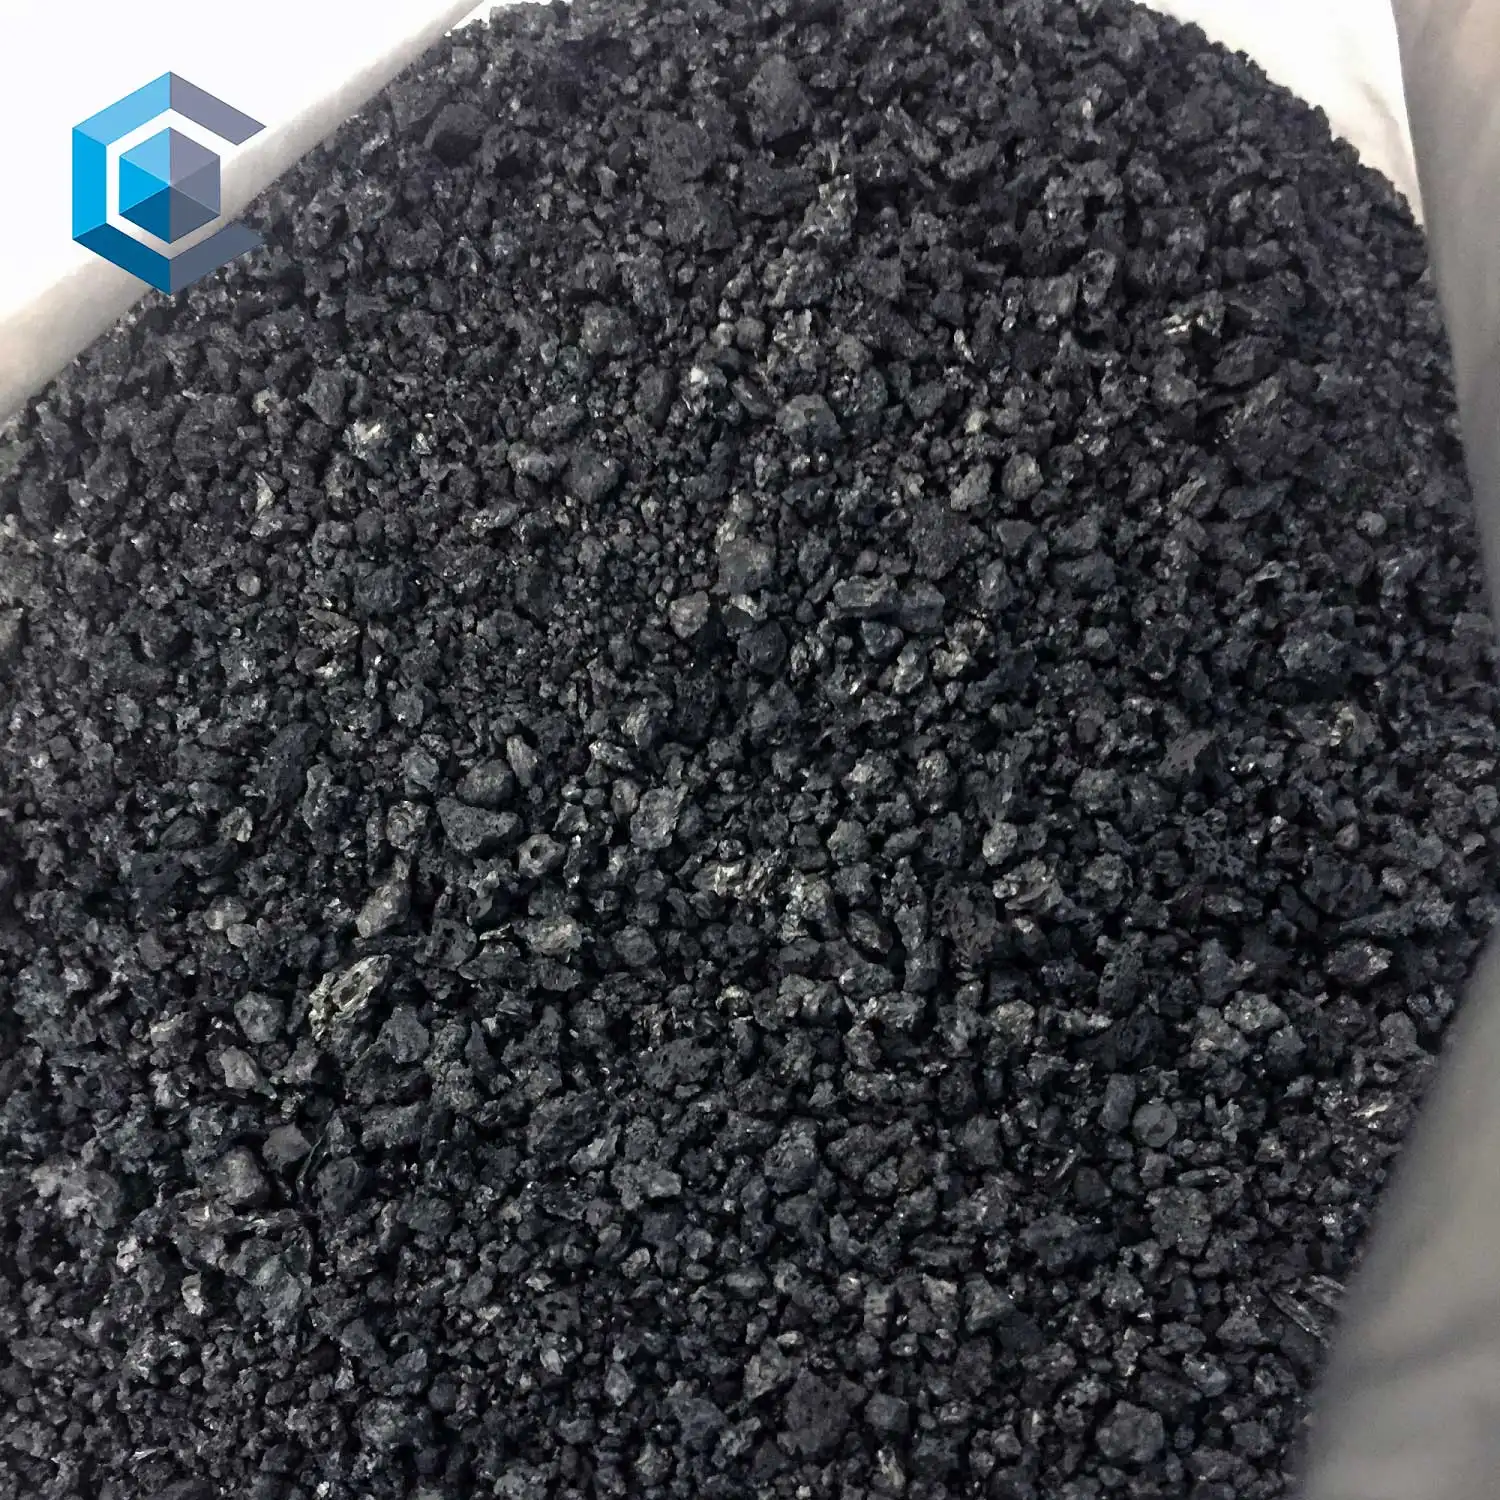 Calcined Petroleum Coke Analysis Suppliers Of Calcined Petroleum Coke Buyers